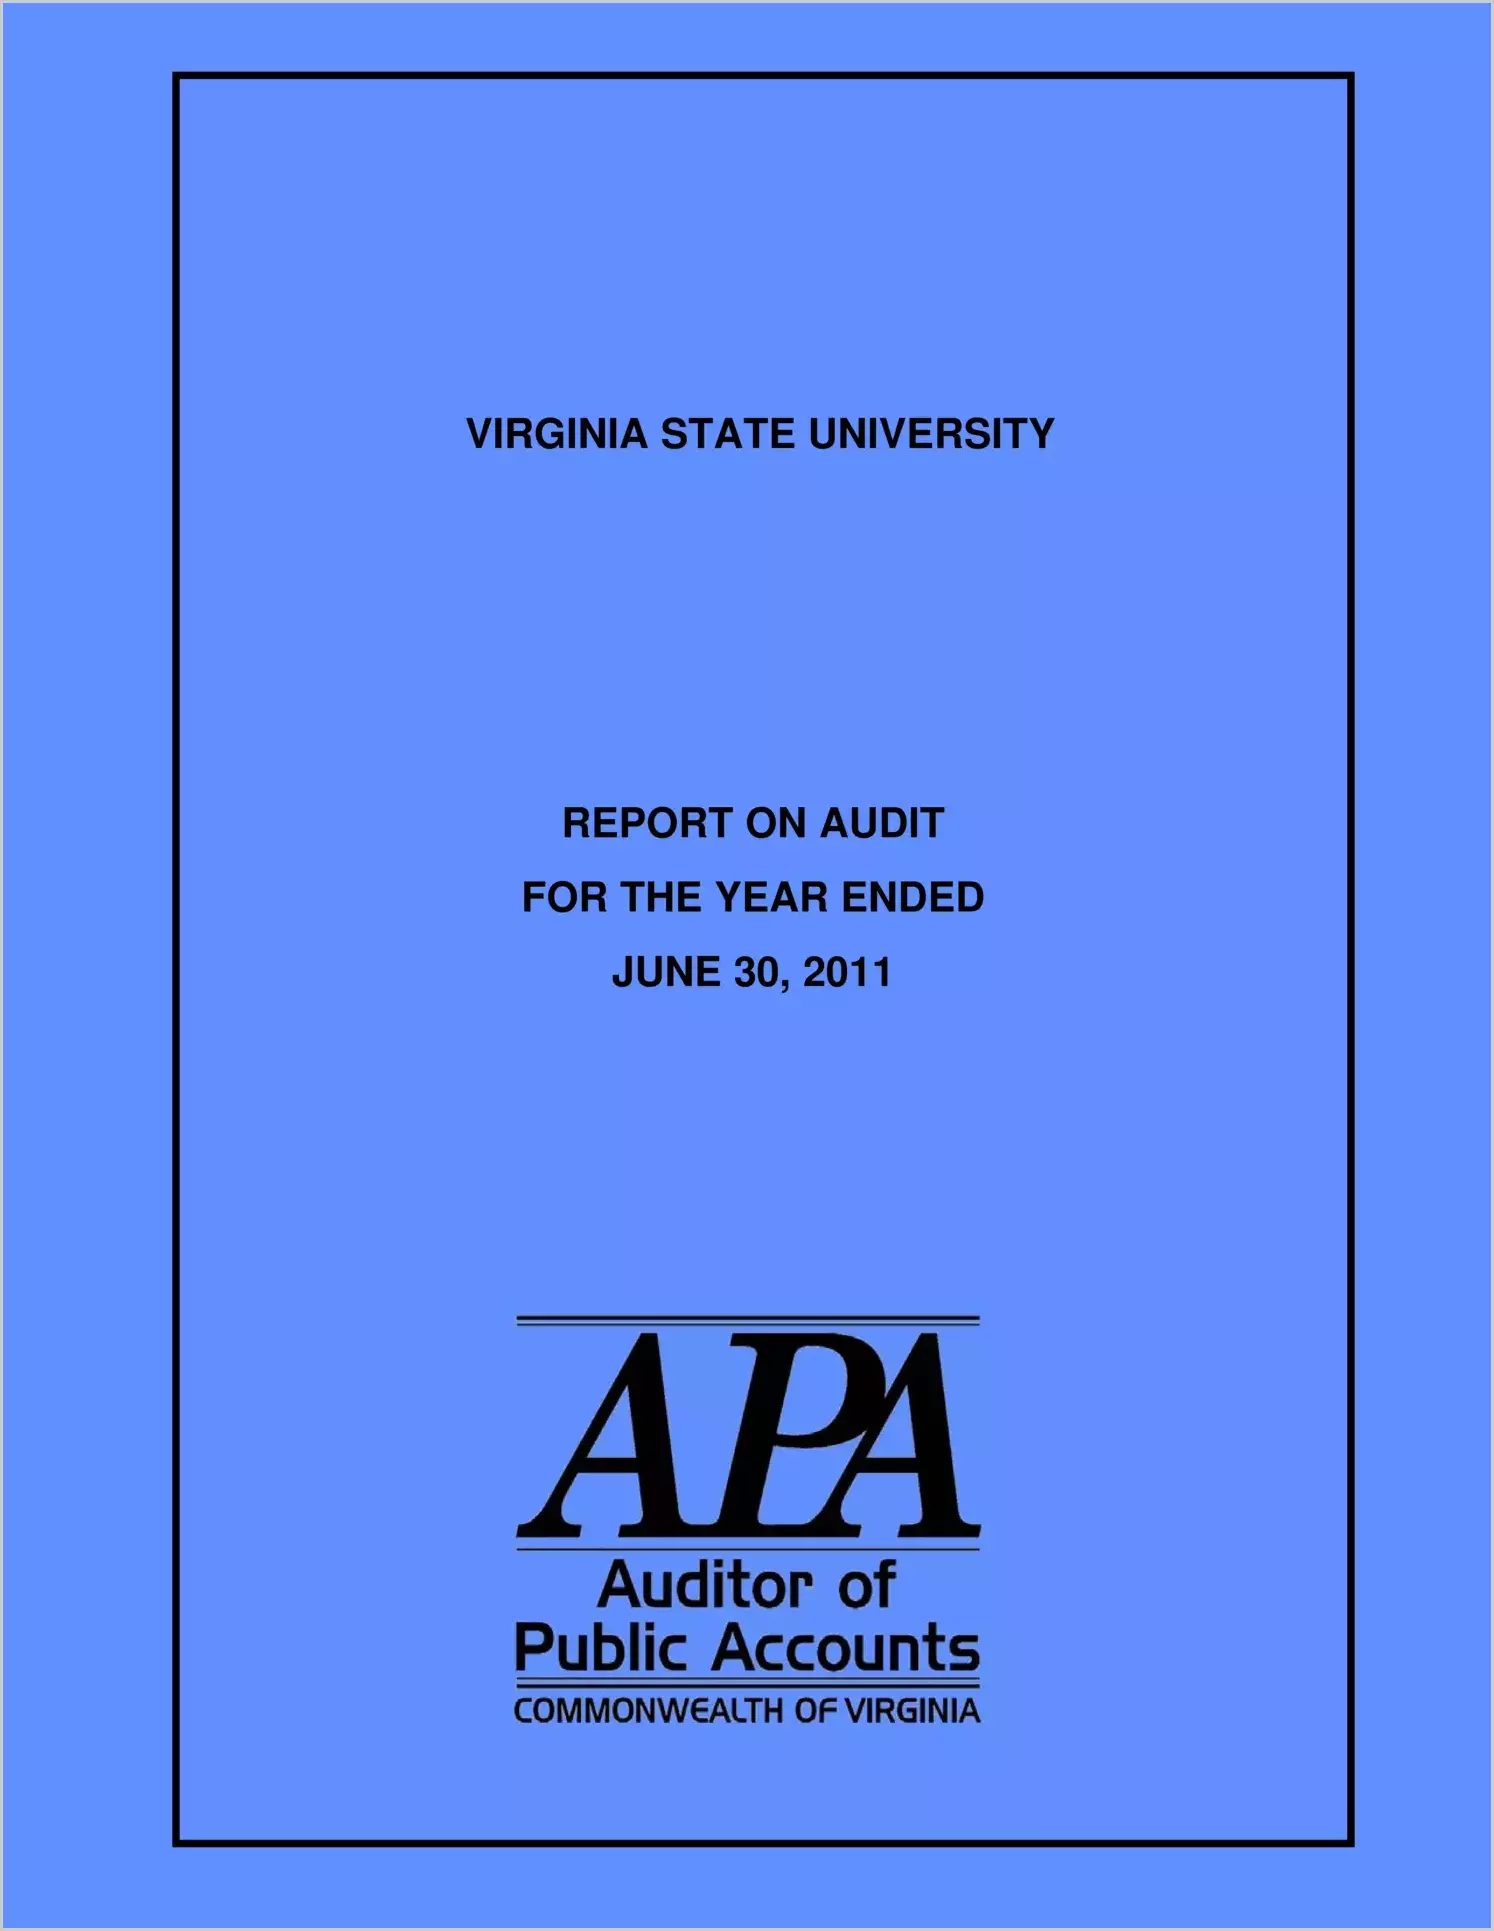 Virginia State University for the year ended June 30, 2011